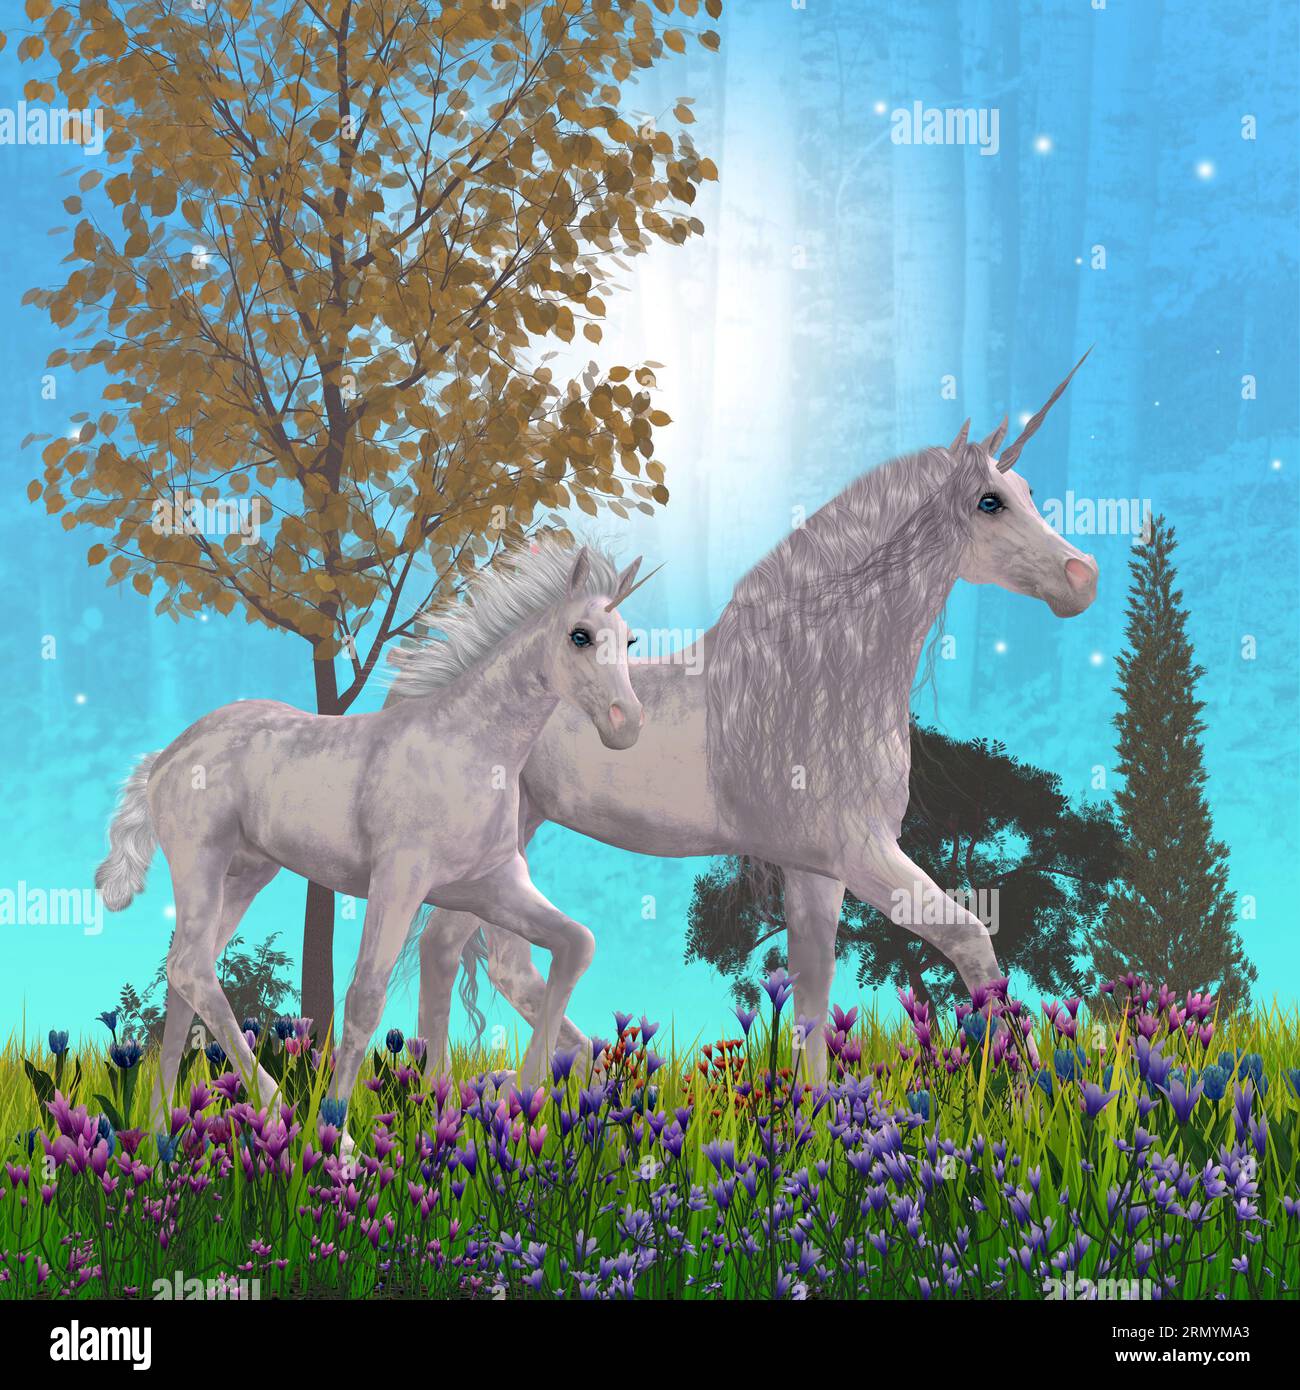 Blue Starlit Unicorn Night - A legendary unicorn mare and her foal prance along a moonlit path through a forest full of flowers. Stock Photo